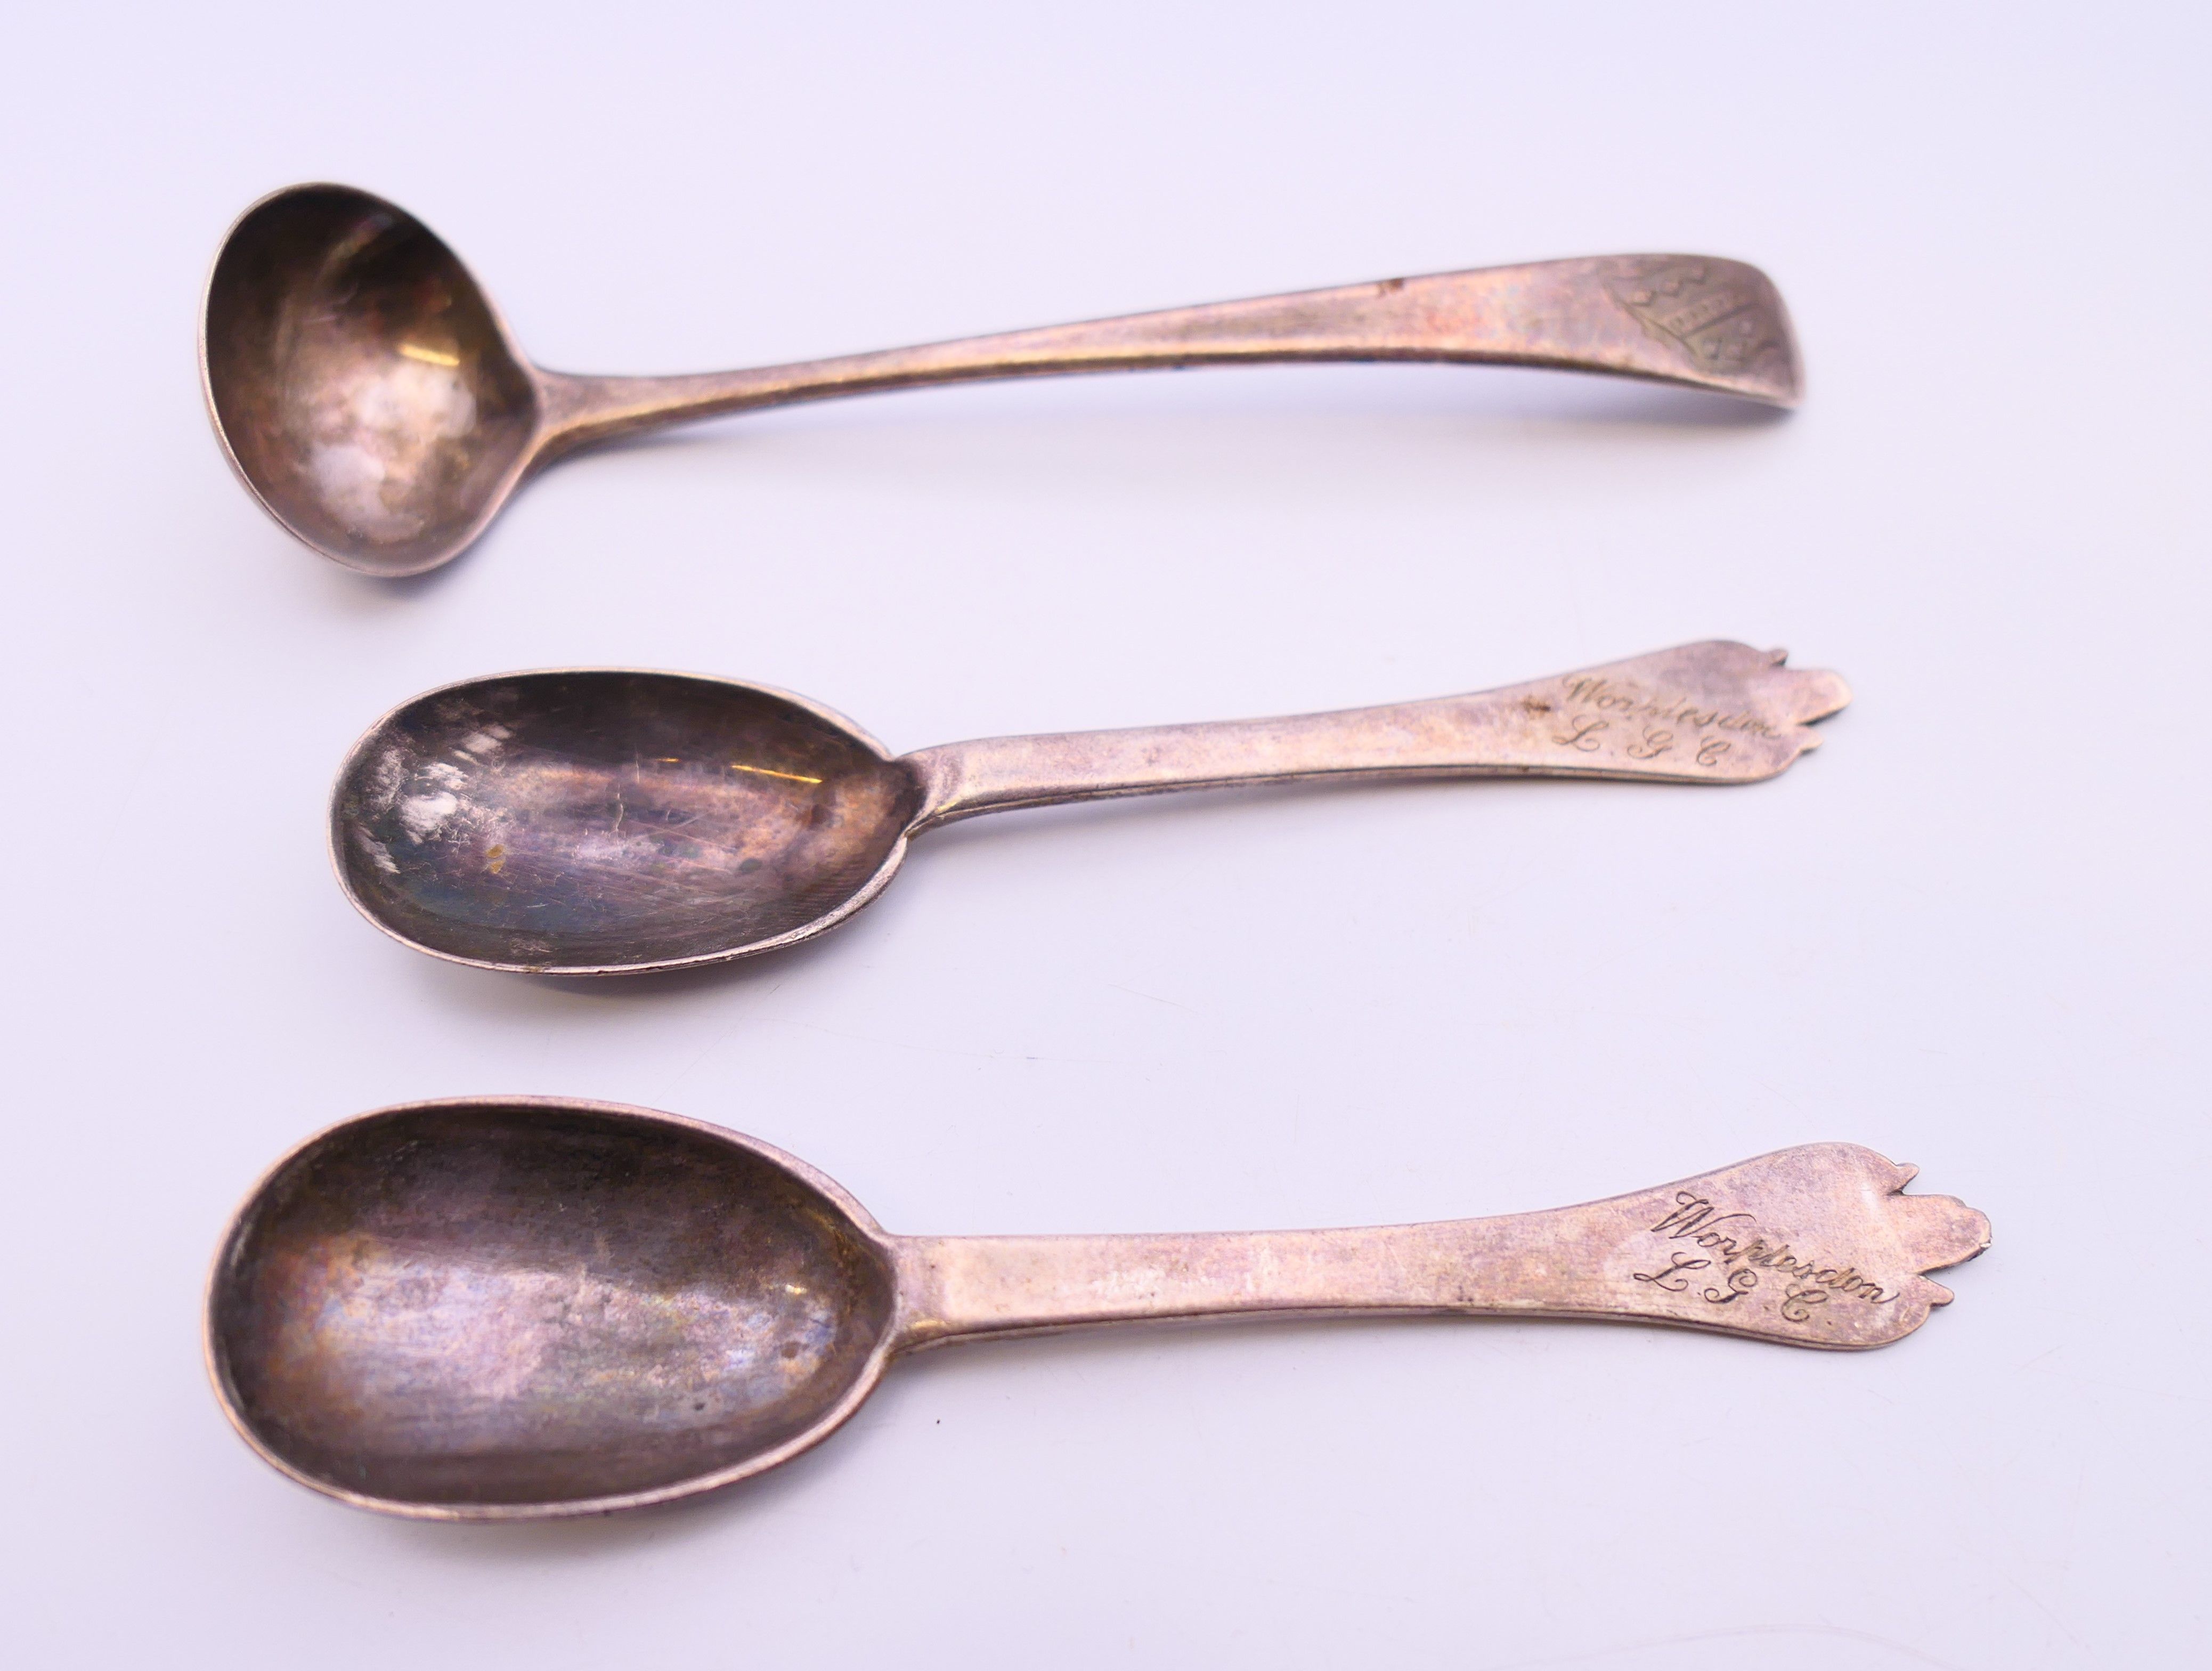 A pair of silver spoons and a small silver ladle. Spoons each 10 cm long. 39.4 grammes.